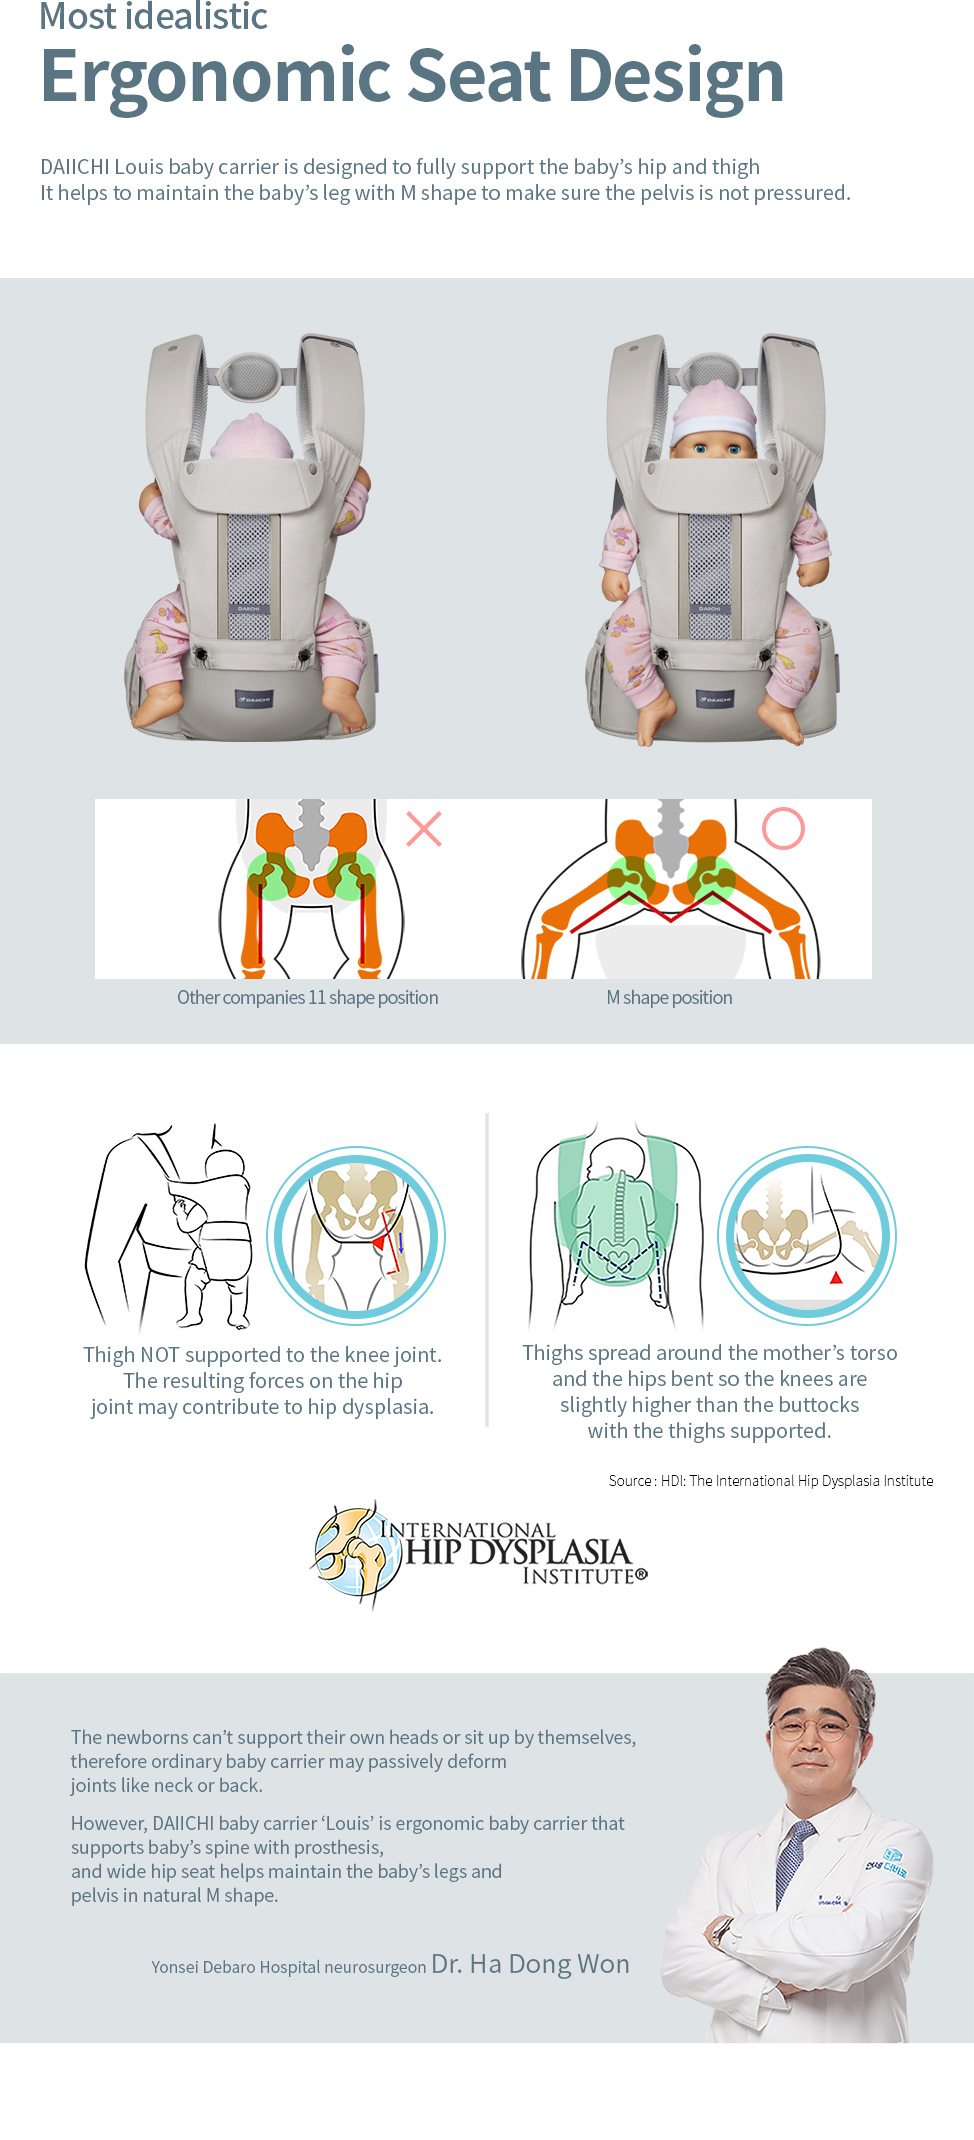 DAIICHI Louis baby carrier is designed to fully support the baby’s hip and thigh. It helps maintain the baby’s leg in M shape so that the pelvis is not pressured.